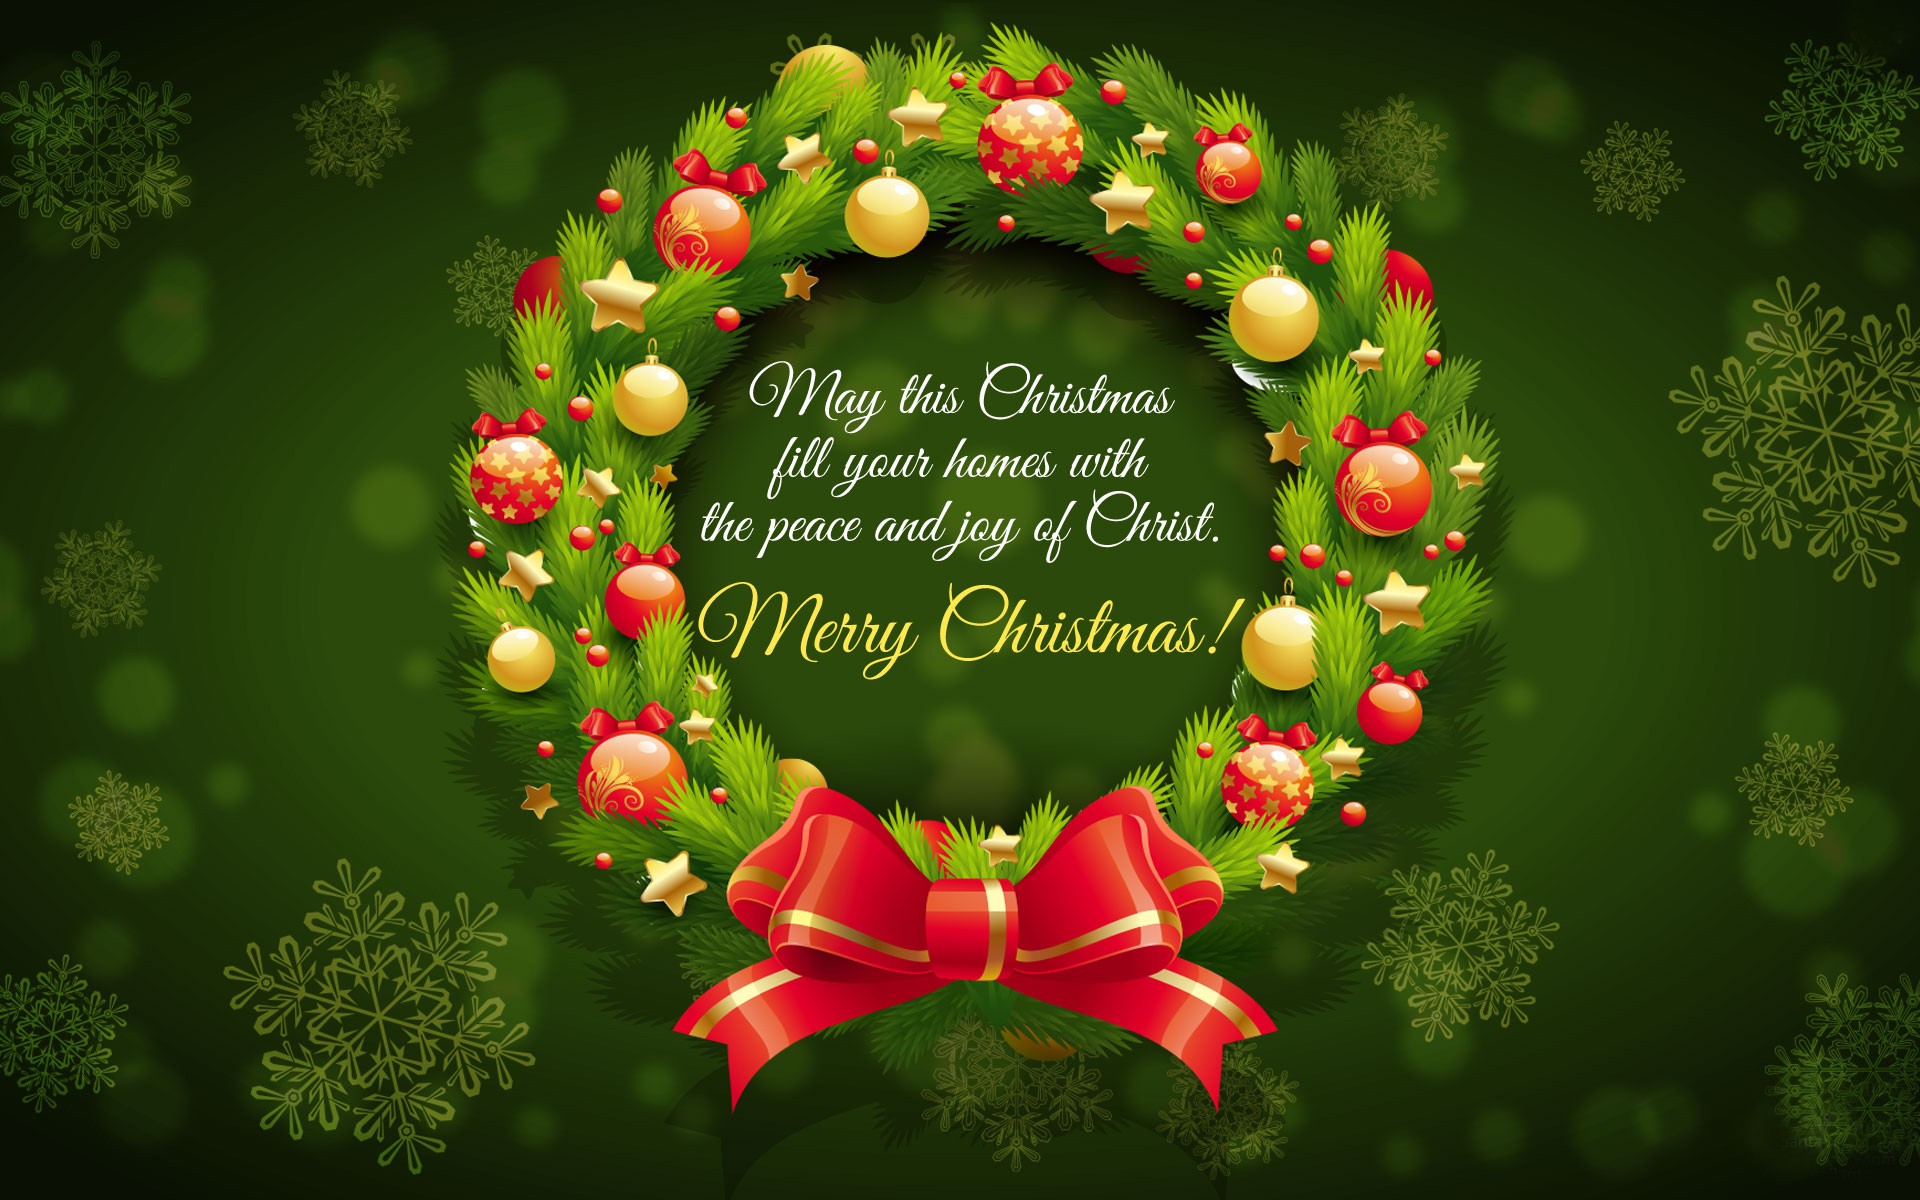 greetings-for-christmas-messages-greetingsforchristmas